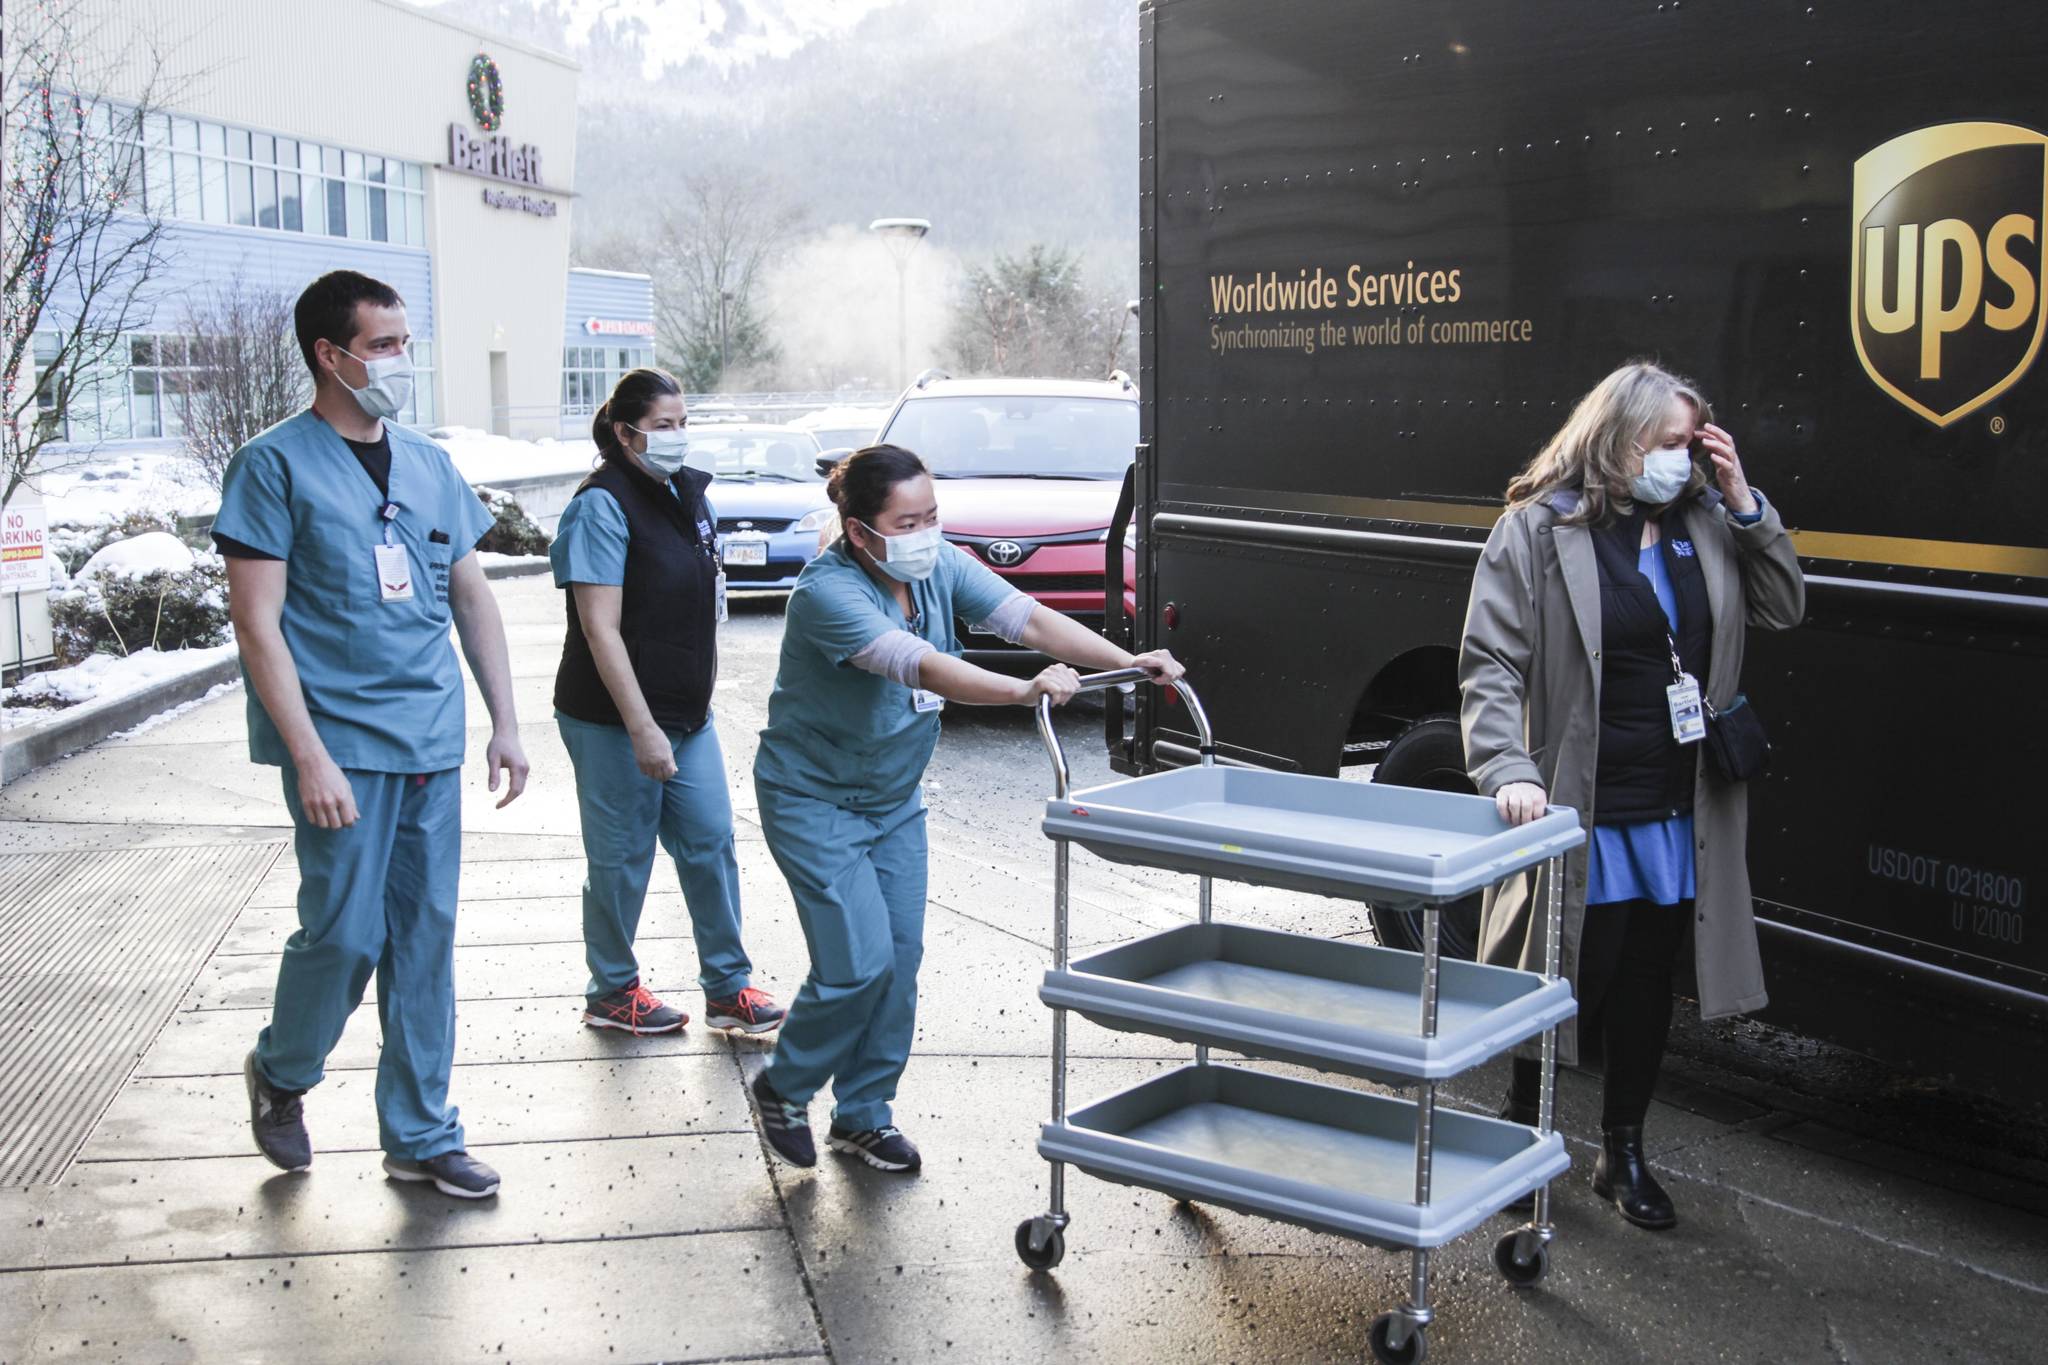 In this December 2020 photo, Bartlett Regional Hospital pharmacy personnel take delivery of the first shipment of the coronavirus vaccine. The state announced Tuesday it was making the vaccine available to all Alaskans starting March 10. (Michael S. Lockett / Juneau Empire File)